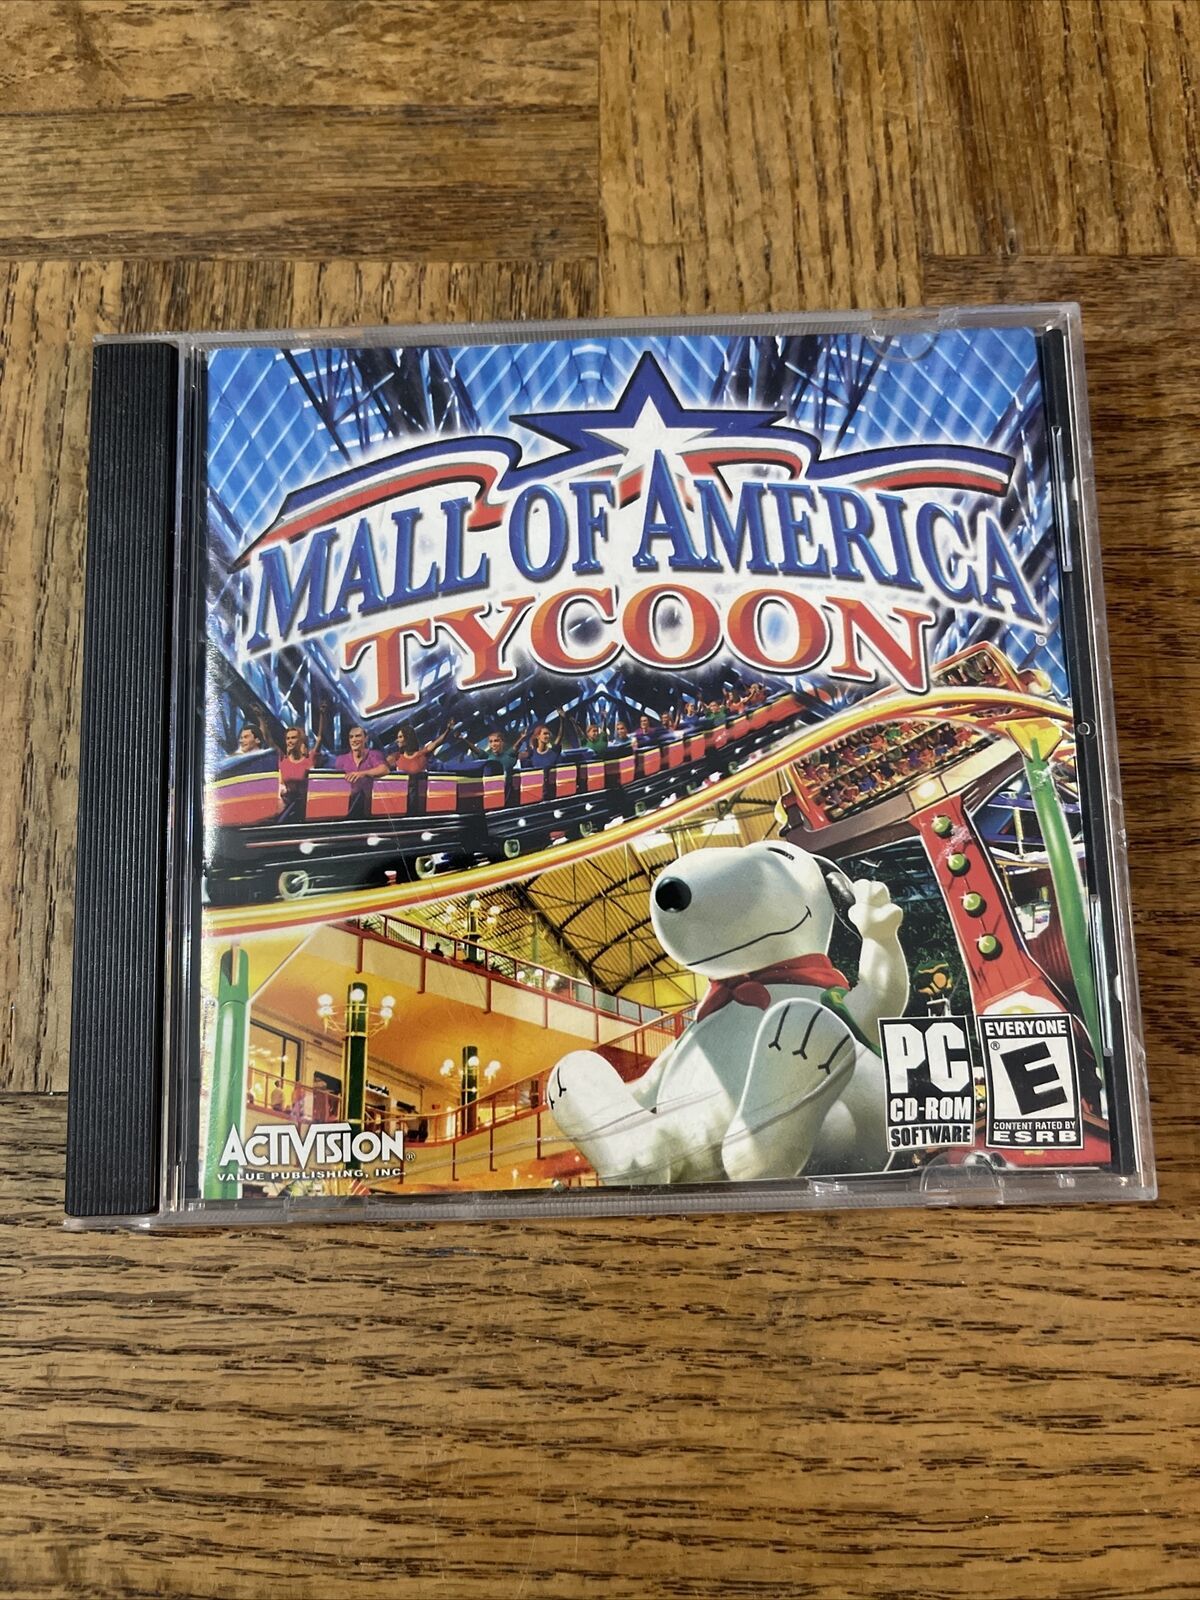 Primary image for Mall Of America Tycoon PC Game